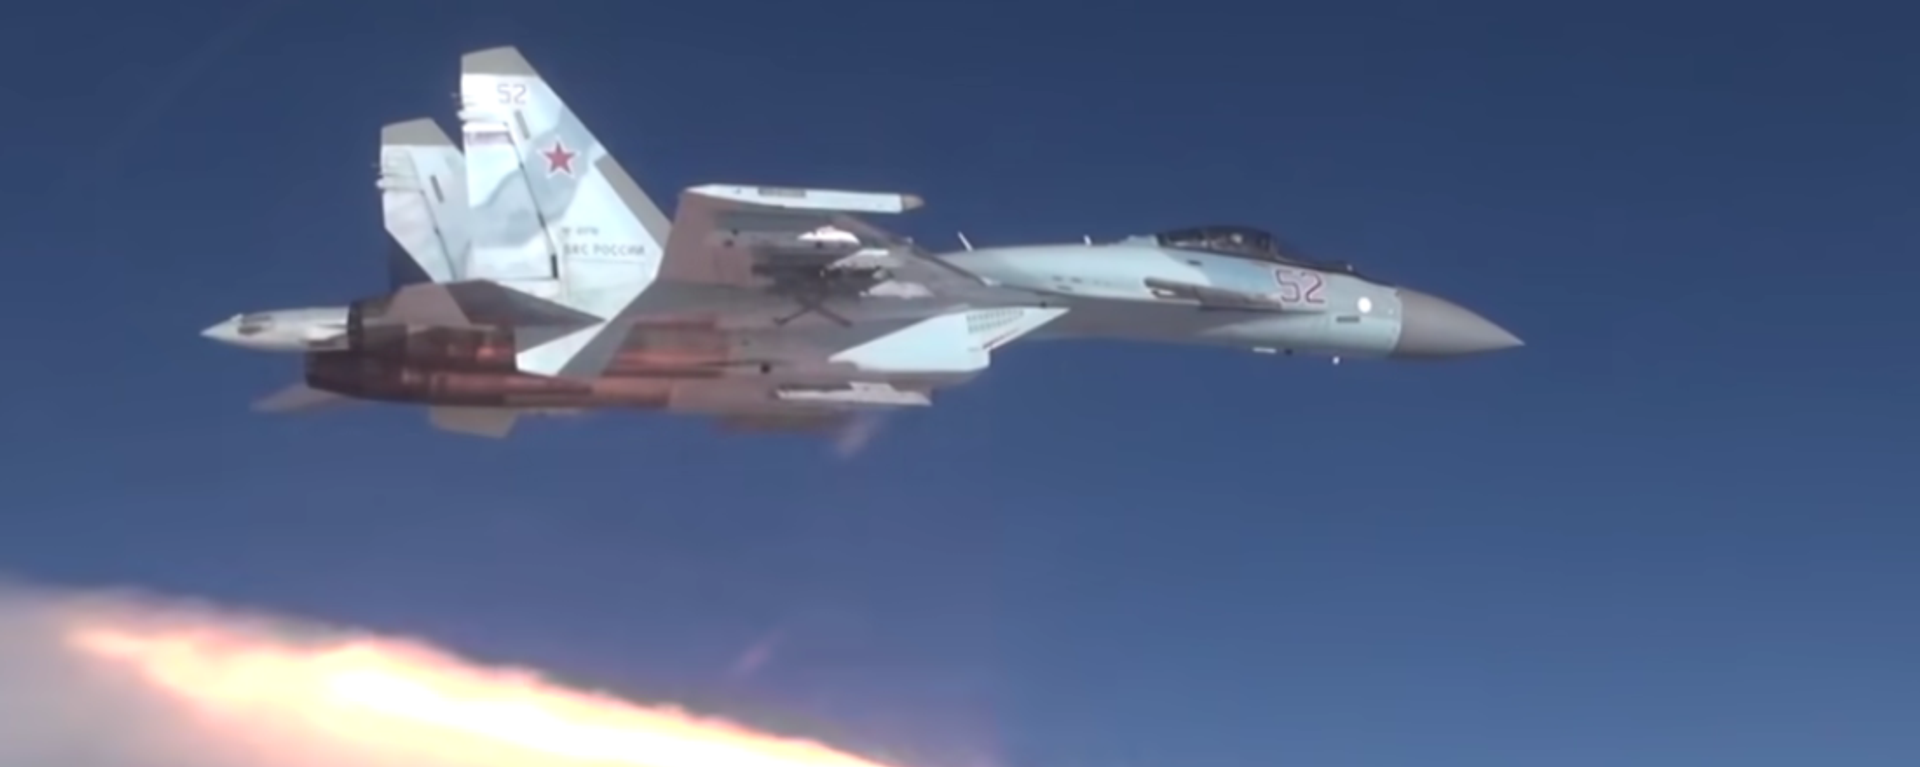 A Russian Su-35S fighter jet fires what appears to be an R-37M ultra-long-range air-to-air missile in a promotional video by the Russian Ministry of Defense - Sputnik Србија, 1920, 11.03.2023